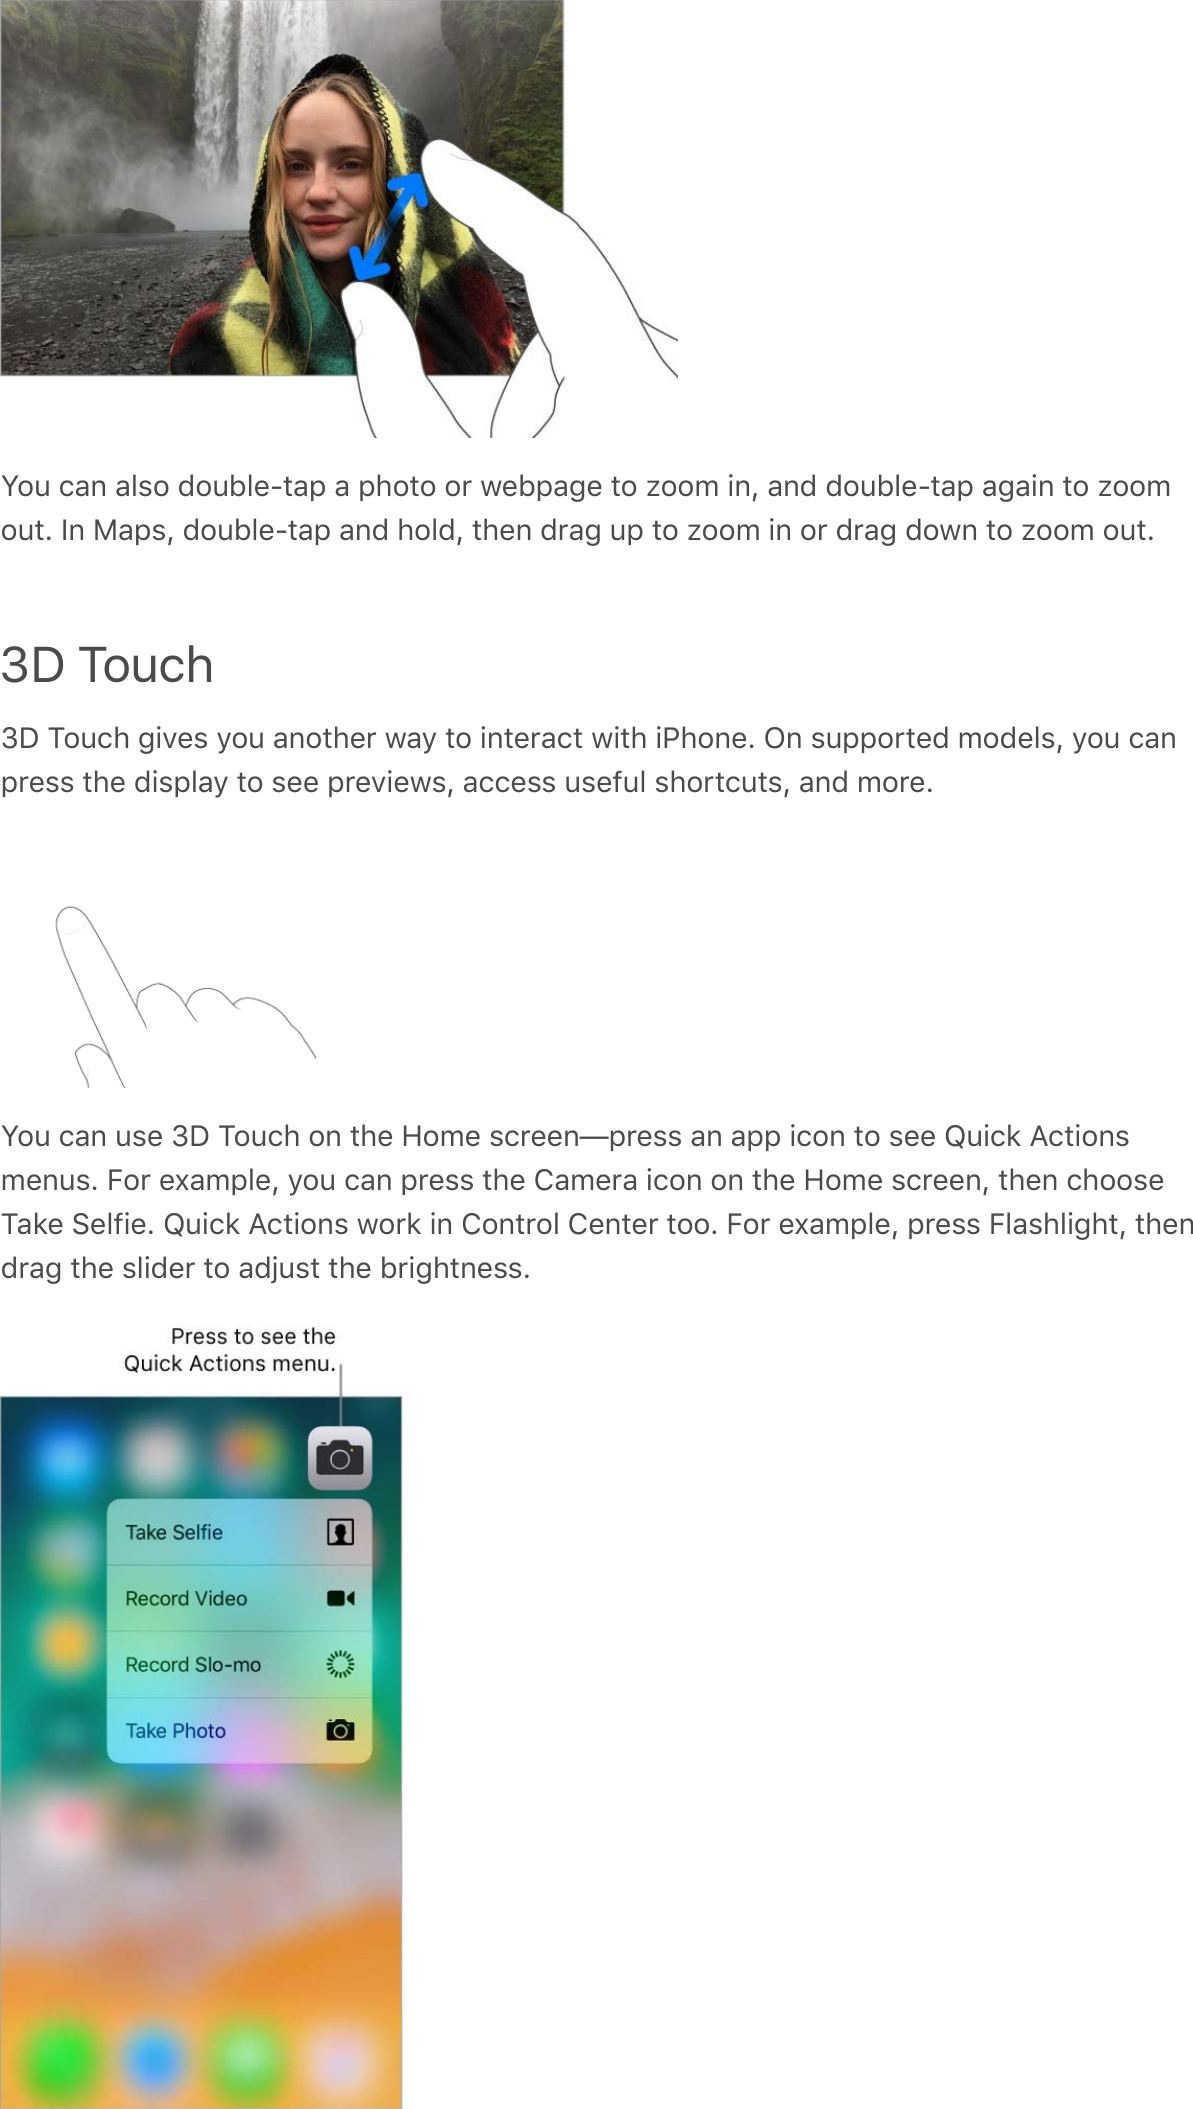 You can also double-tap a photo or webpage to zoom in, and double-tap again to zoomout. In Maps, double-tap and hold, then drag up to zoom in or drag down to zoom out.3D Touch3D Touch gives you another way to interact with iPhone. On supported models, you canpress the display to see previews, access useful shortcuts, and more.You can use 3D Touch on the Home screen—press an app icon to see Quick Actionsmenus. For example, you can press the Camera icon on the Home screen, then chooseTake Selfie. Quick Actions work in Control Center too. For example, press Flashlight, thendrag the slider to adjust the brightness.